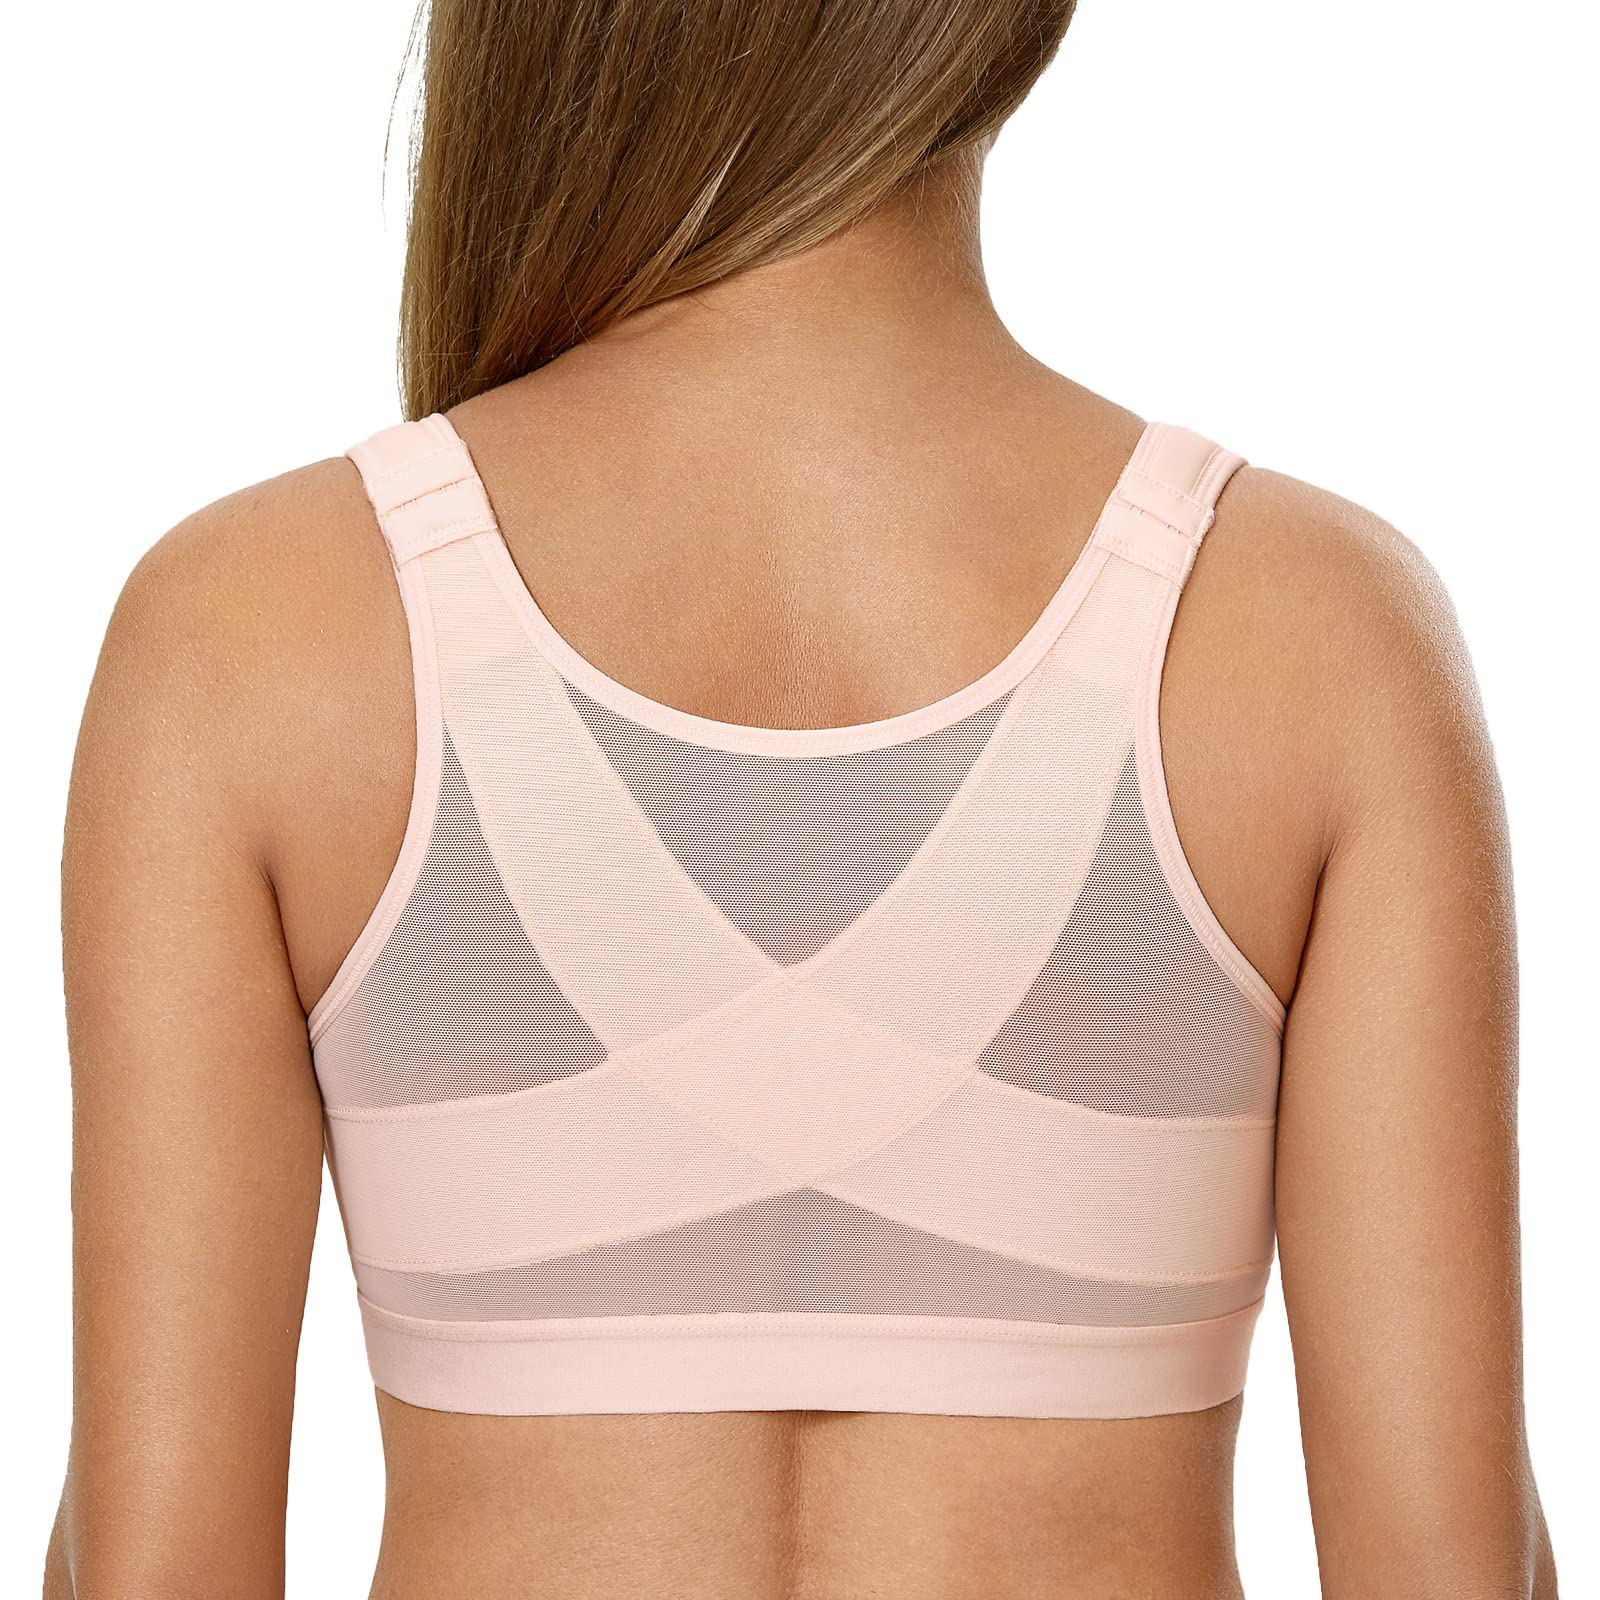 DELIMIRA Womens Front closure Posture Wireless Back Support Full coverage Bra Apricot Pink 48D